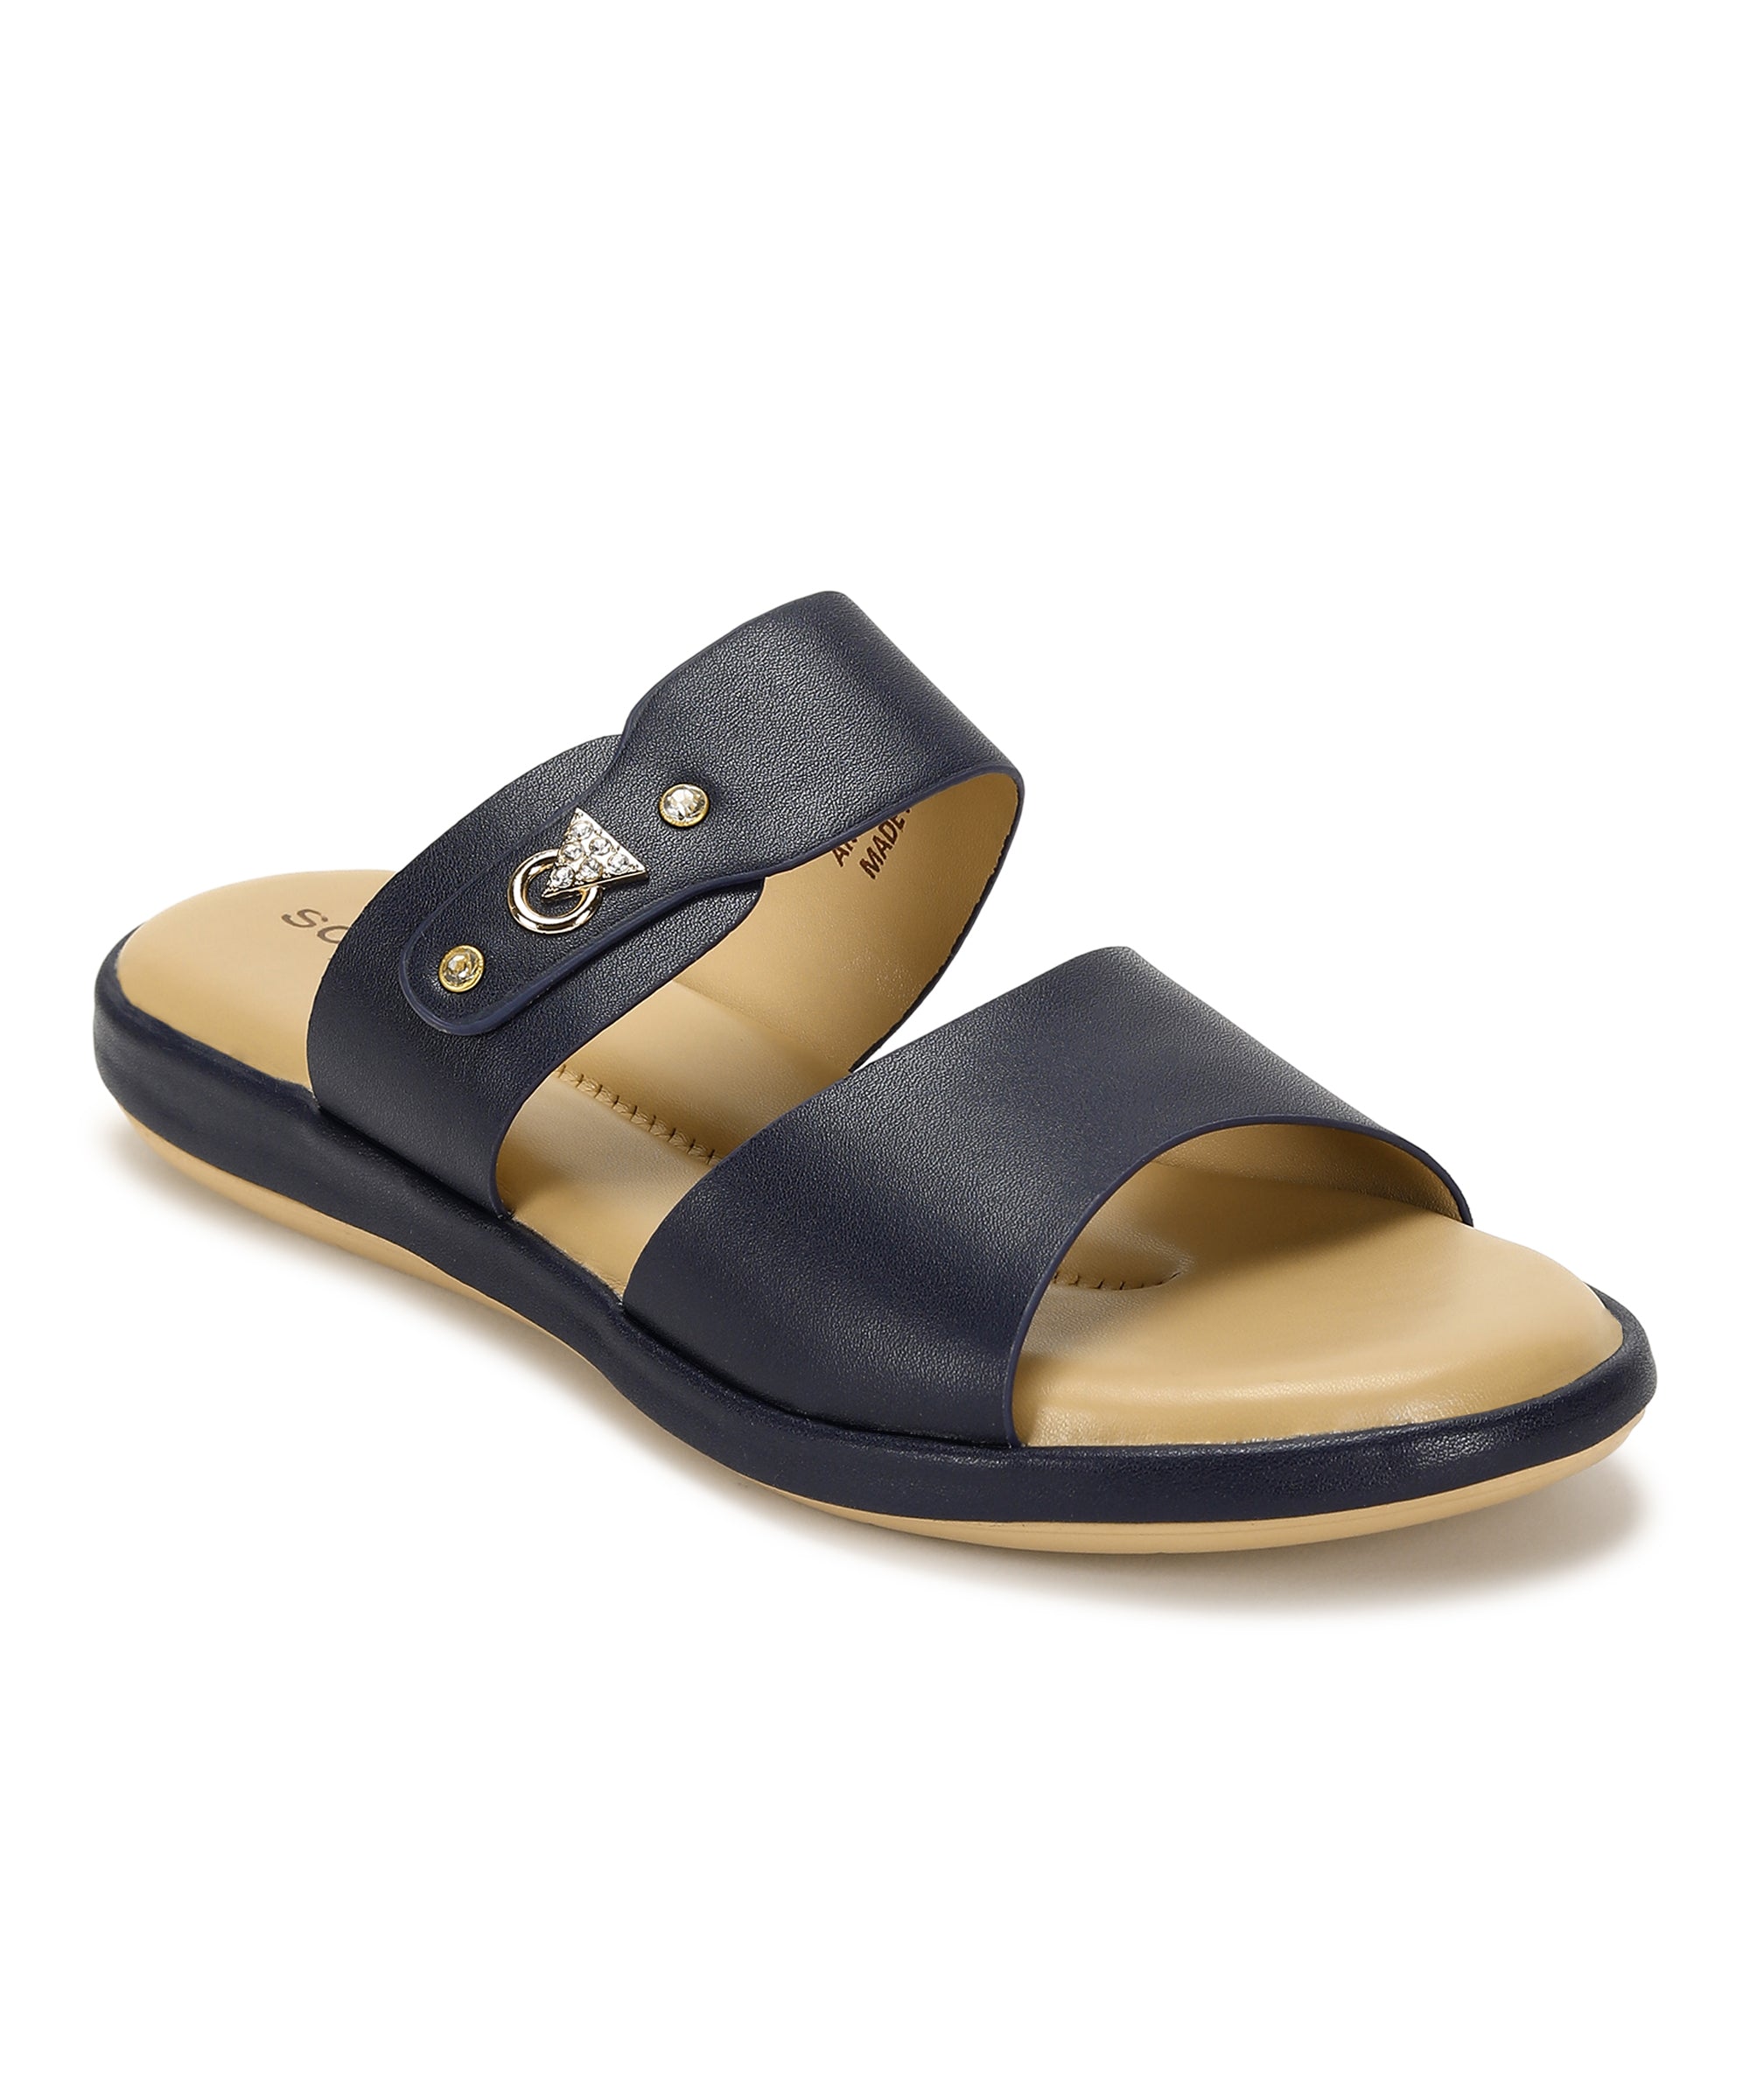 Bata - Shop Online: https://www.bata.com.pk/collections/men-sandals/products/861-9323  Move freely and in comfort with the New Summer Arrivals. Avail FLAT Rs 500  off on Shopping Online for up to Rs 2500. #NewArrivals #BataPk | Facebook